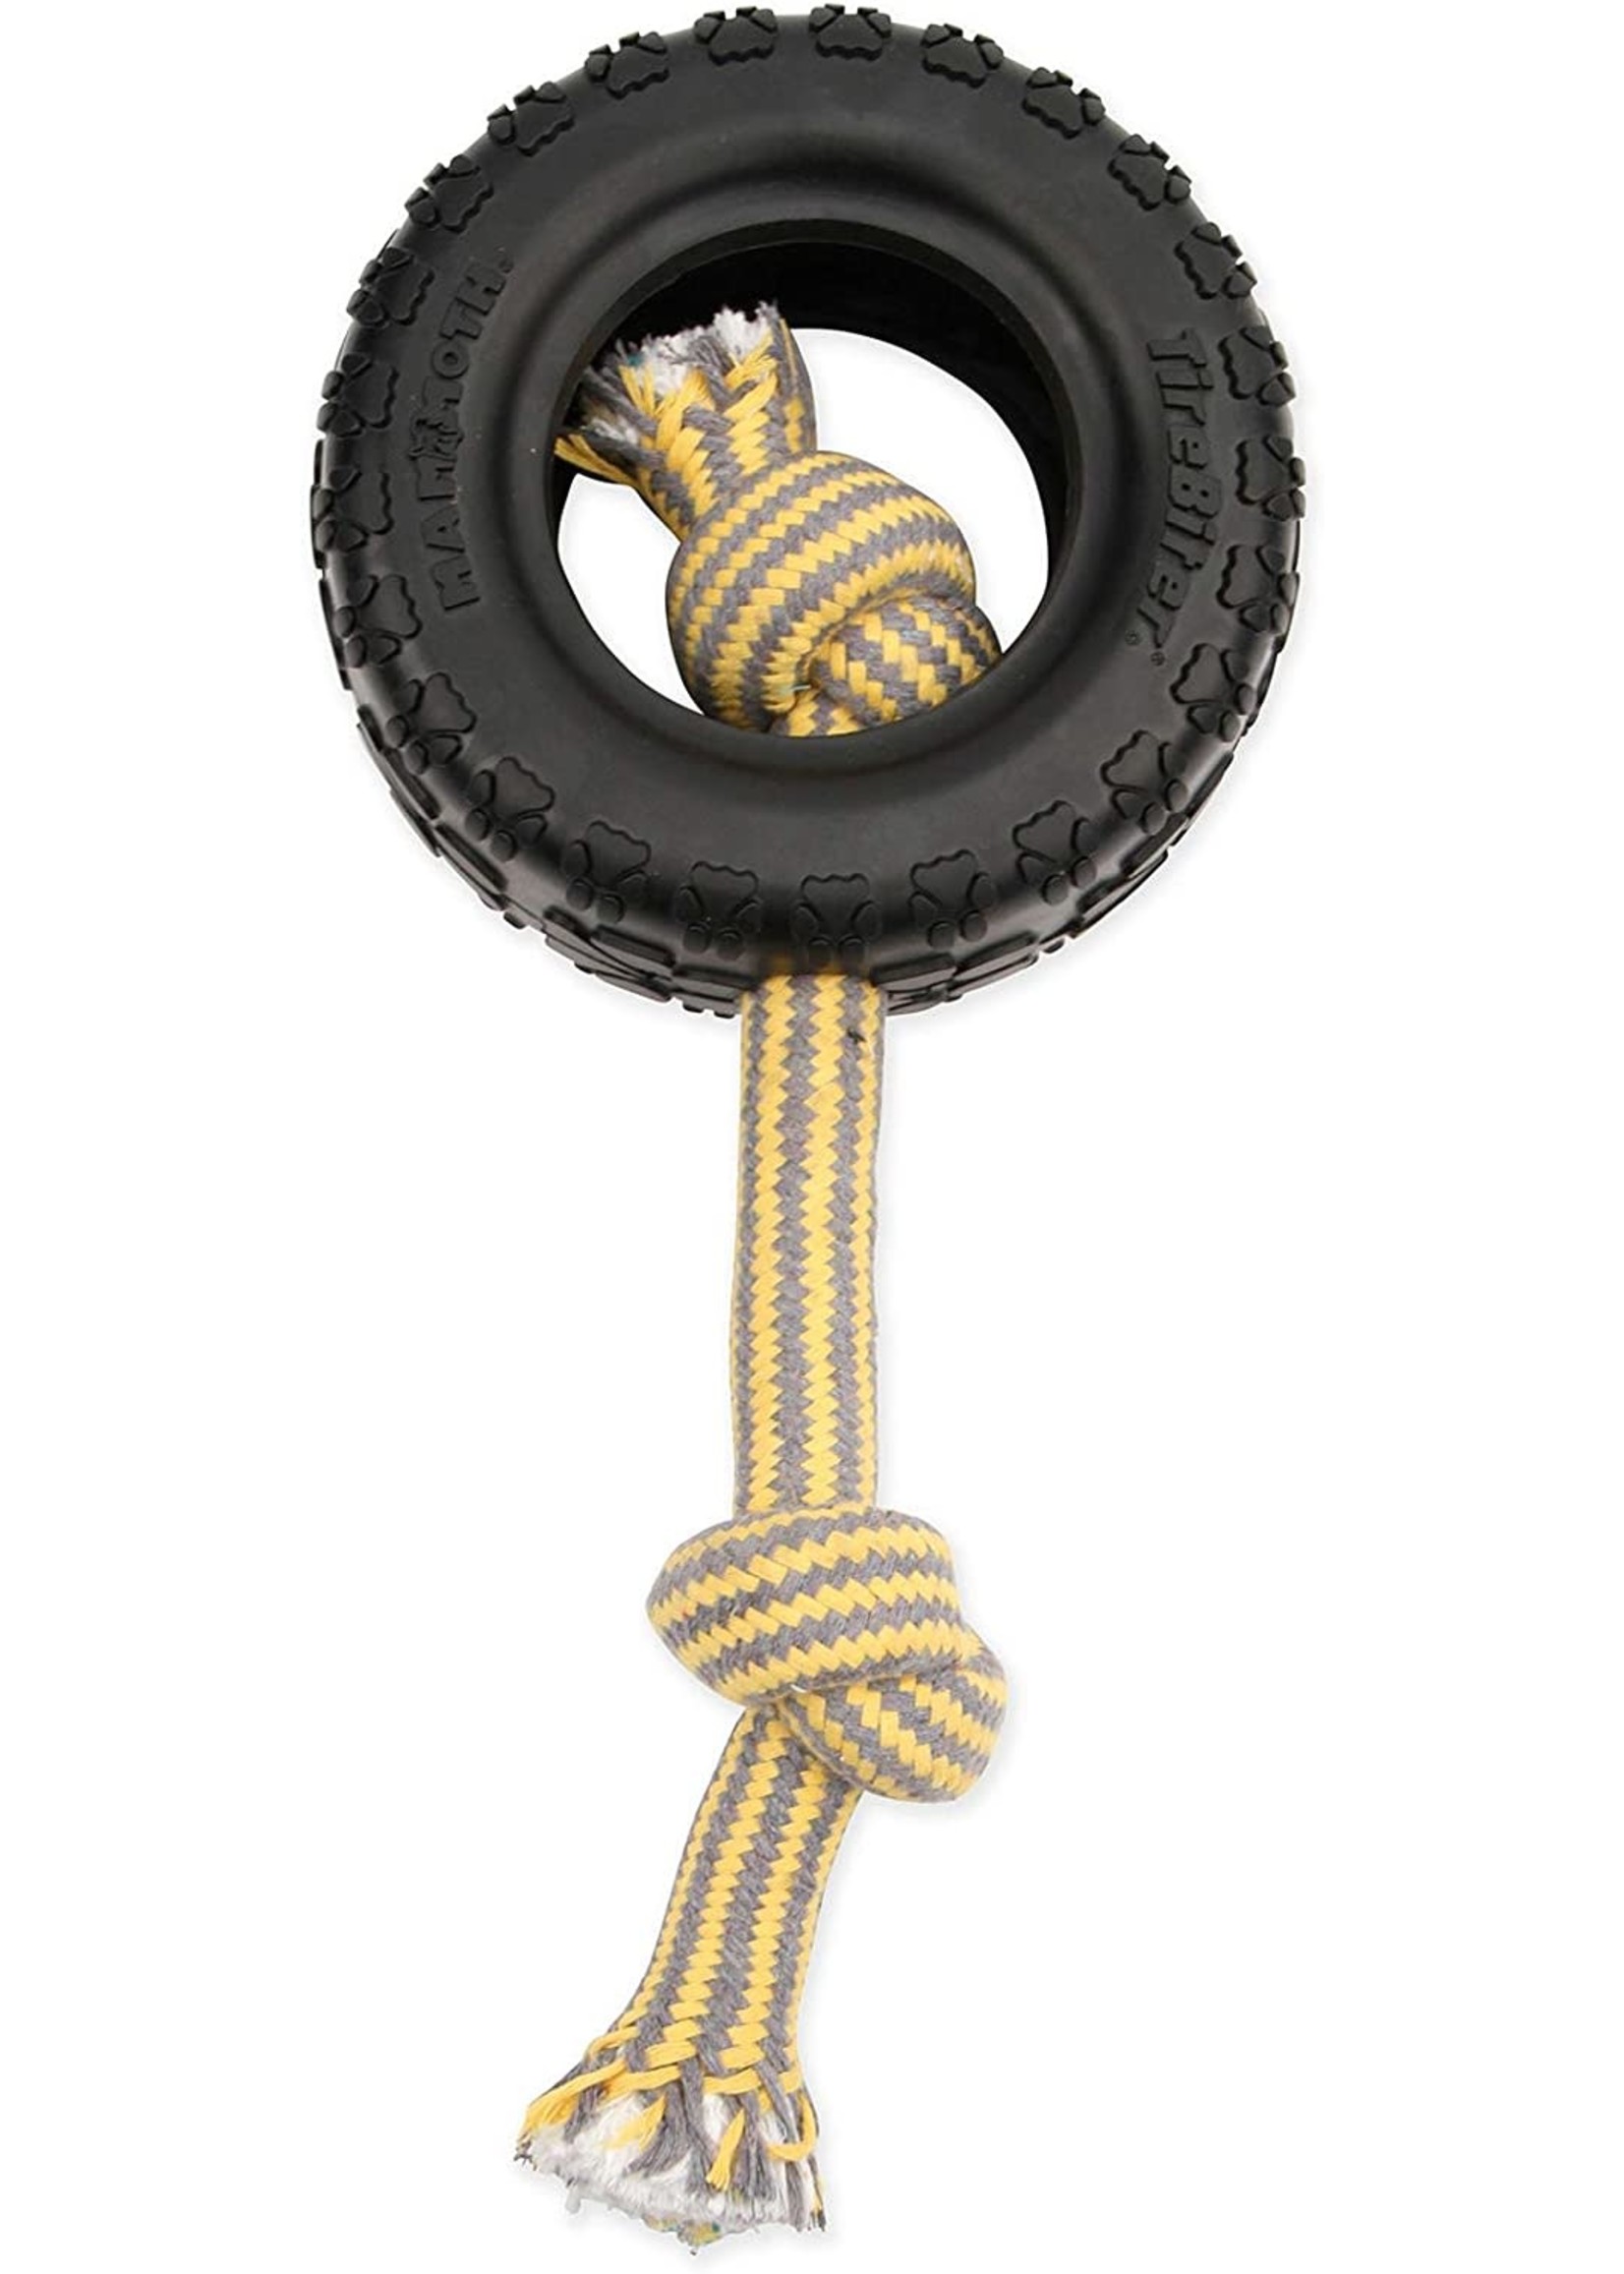 Mammoth Tire Biter II with Rope Natural Rubber Dog Toys for Extreme Chewers Extra Large 7 inches